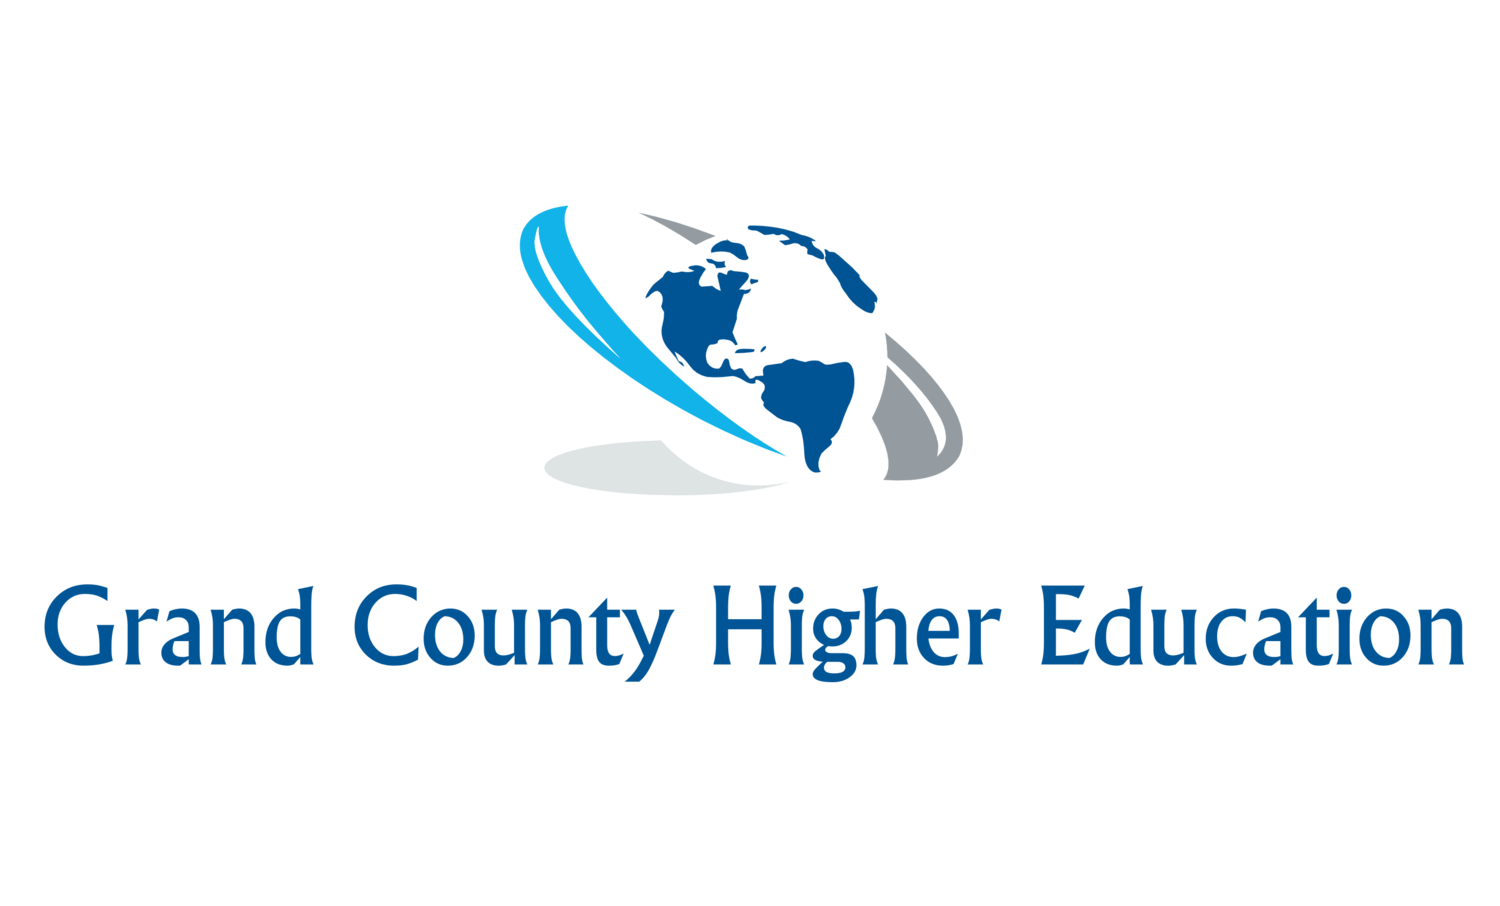 Grand County Higher Education